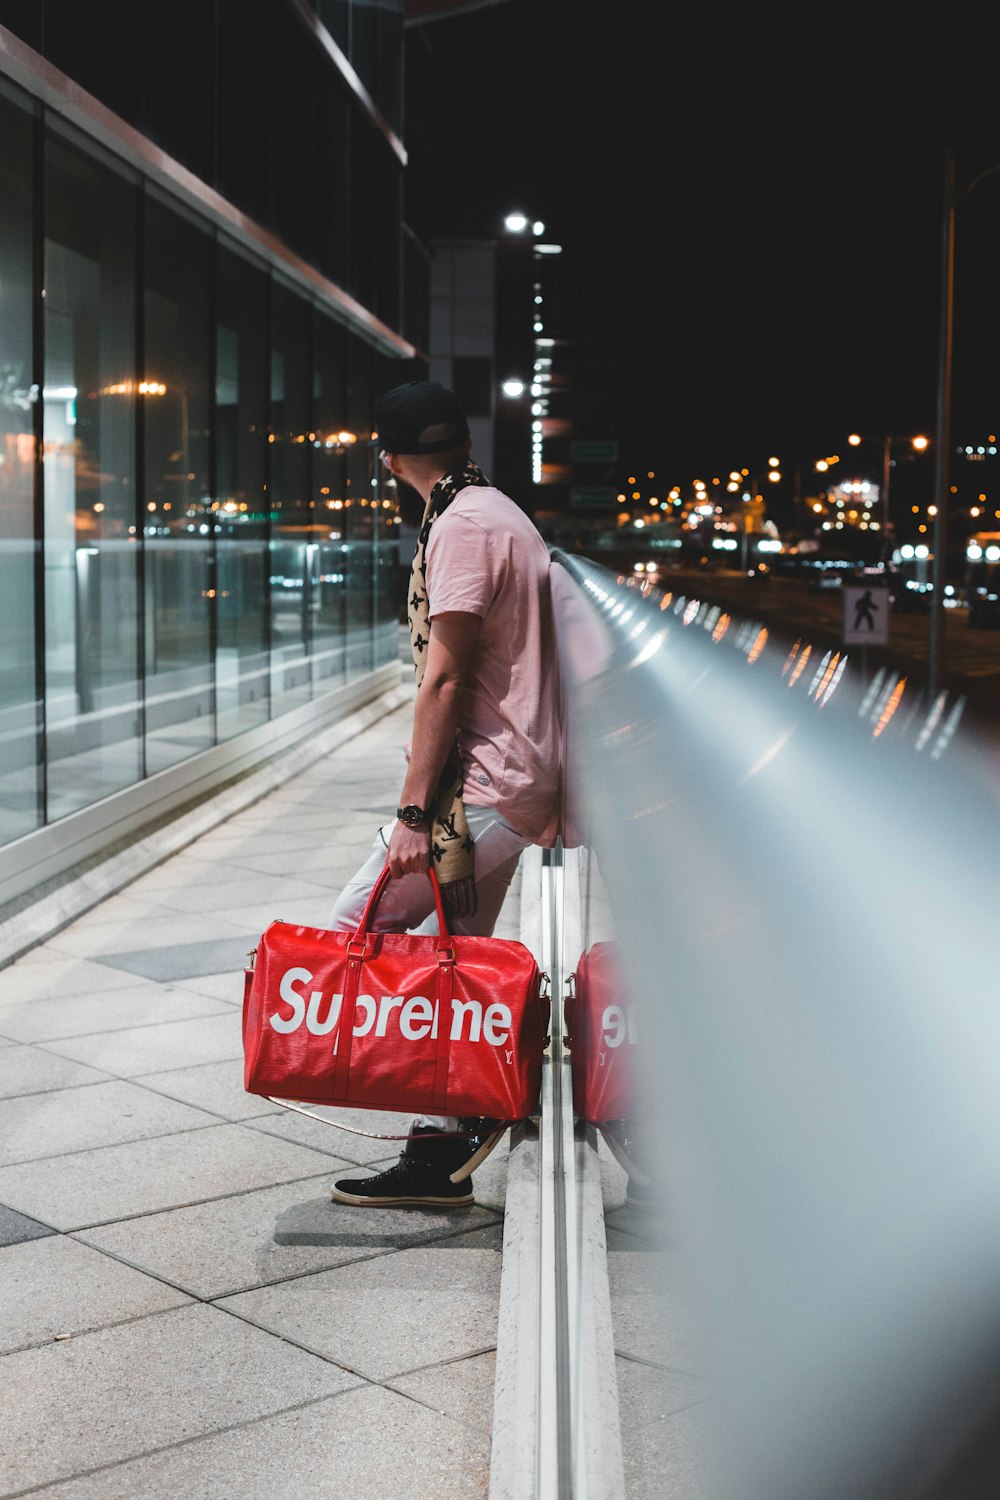 Man in pink shirt with red Supreme bag in hand walks towards